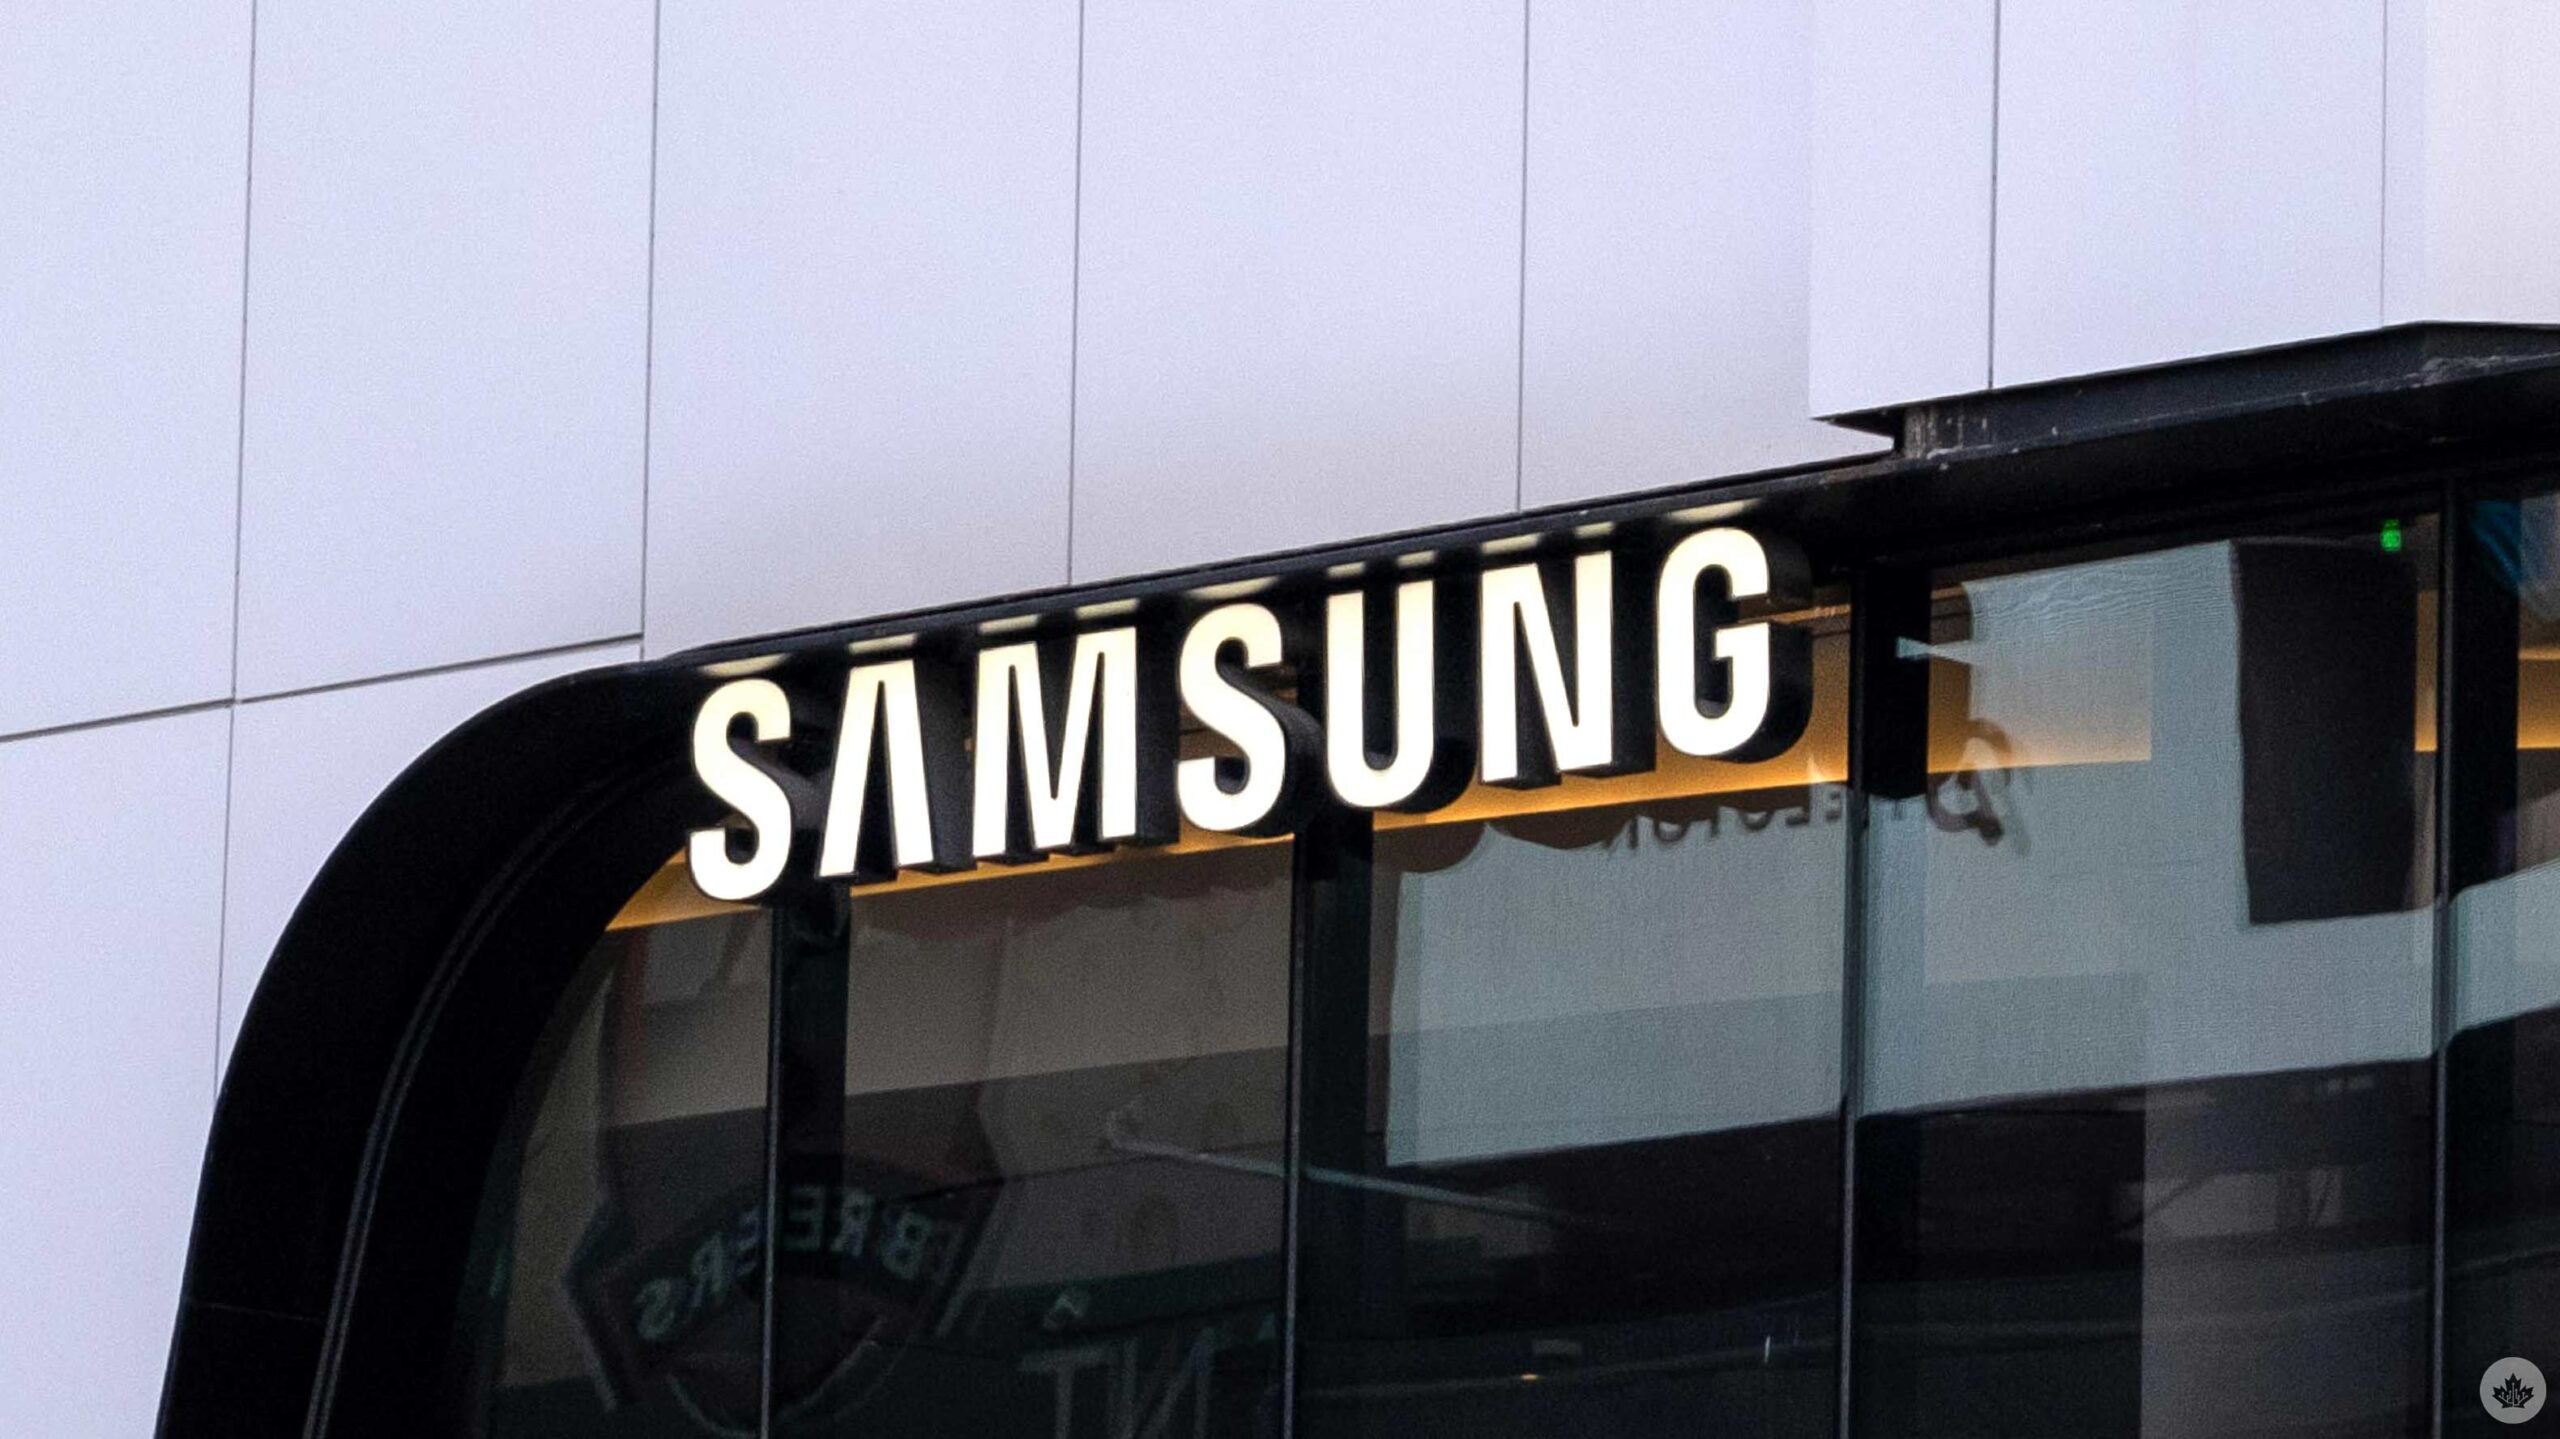 Samsung Canada ranks in the top 3 most reputable companies in Canada